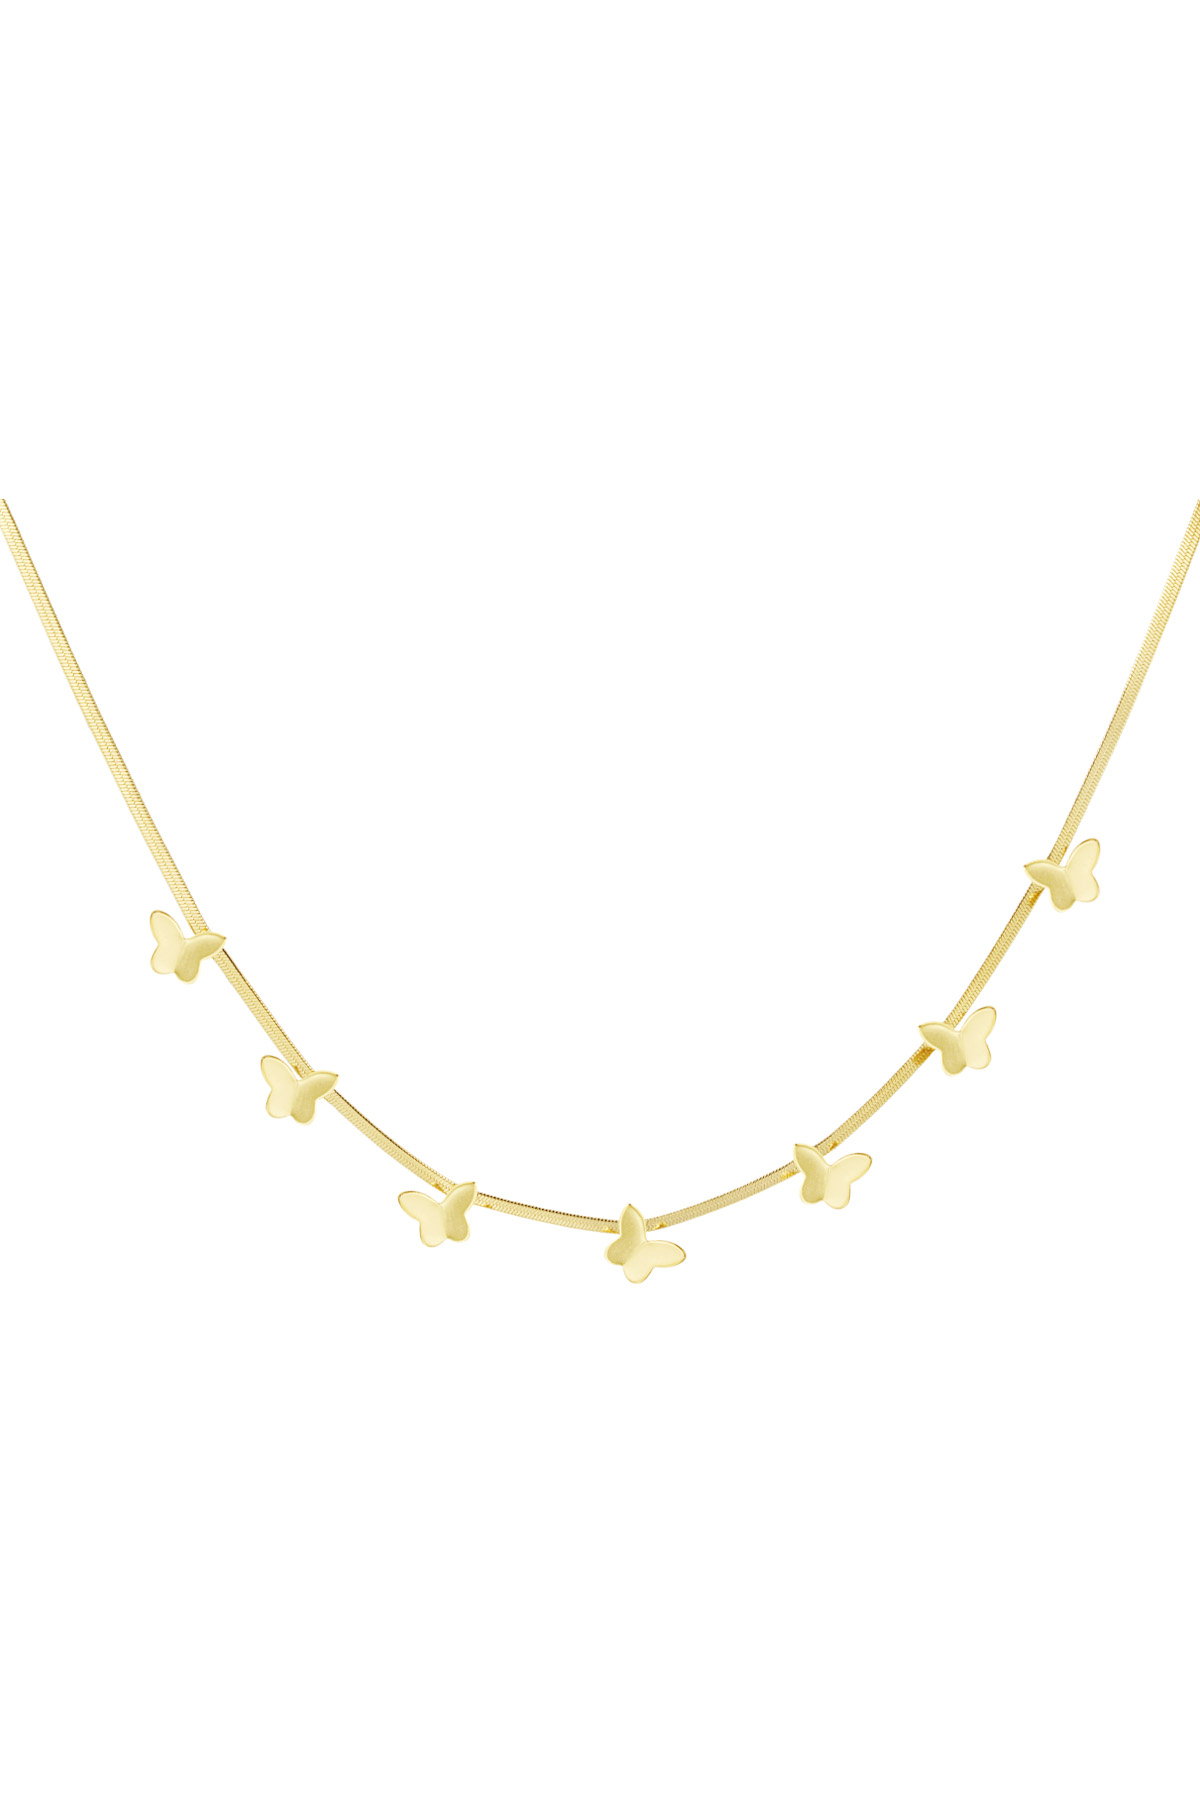 Flat link necklace with butterflies - gold